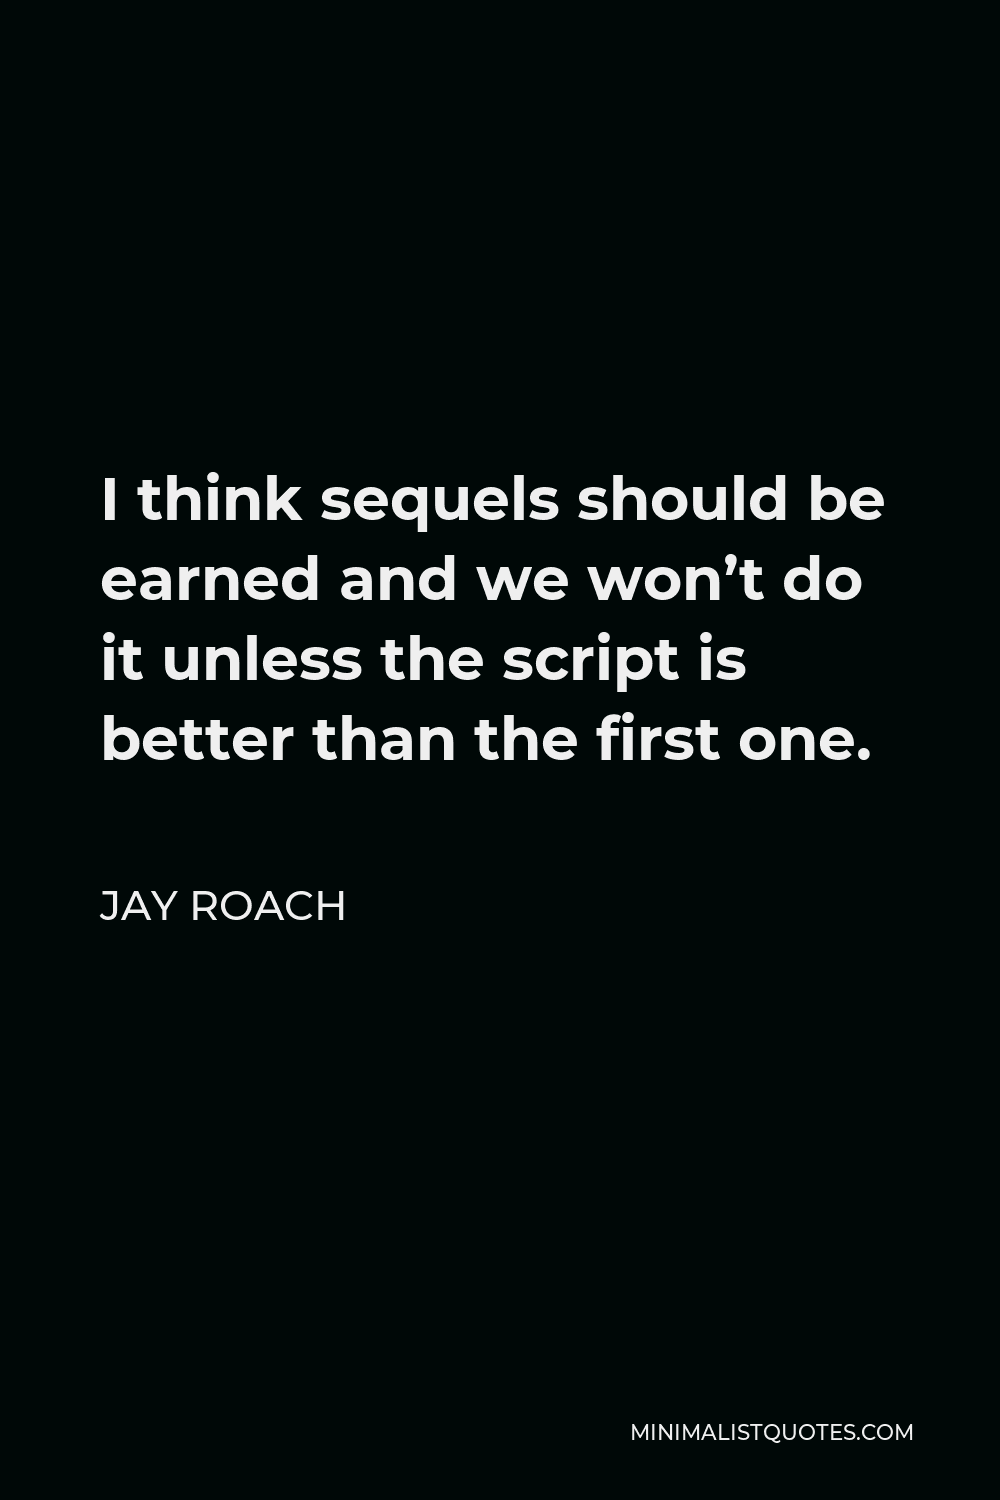 Jay Roach Quote - I think sequels should be earned and we won’t do it unless the script is better than the first one.